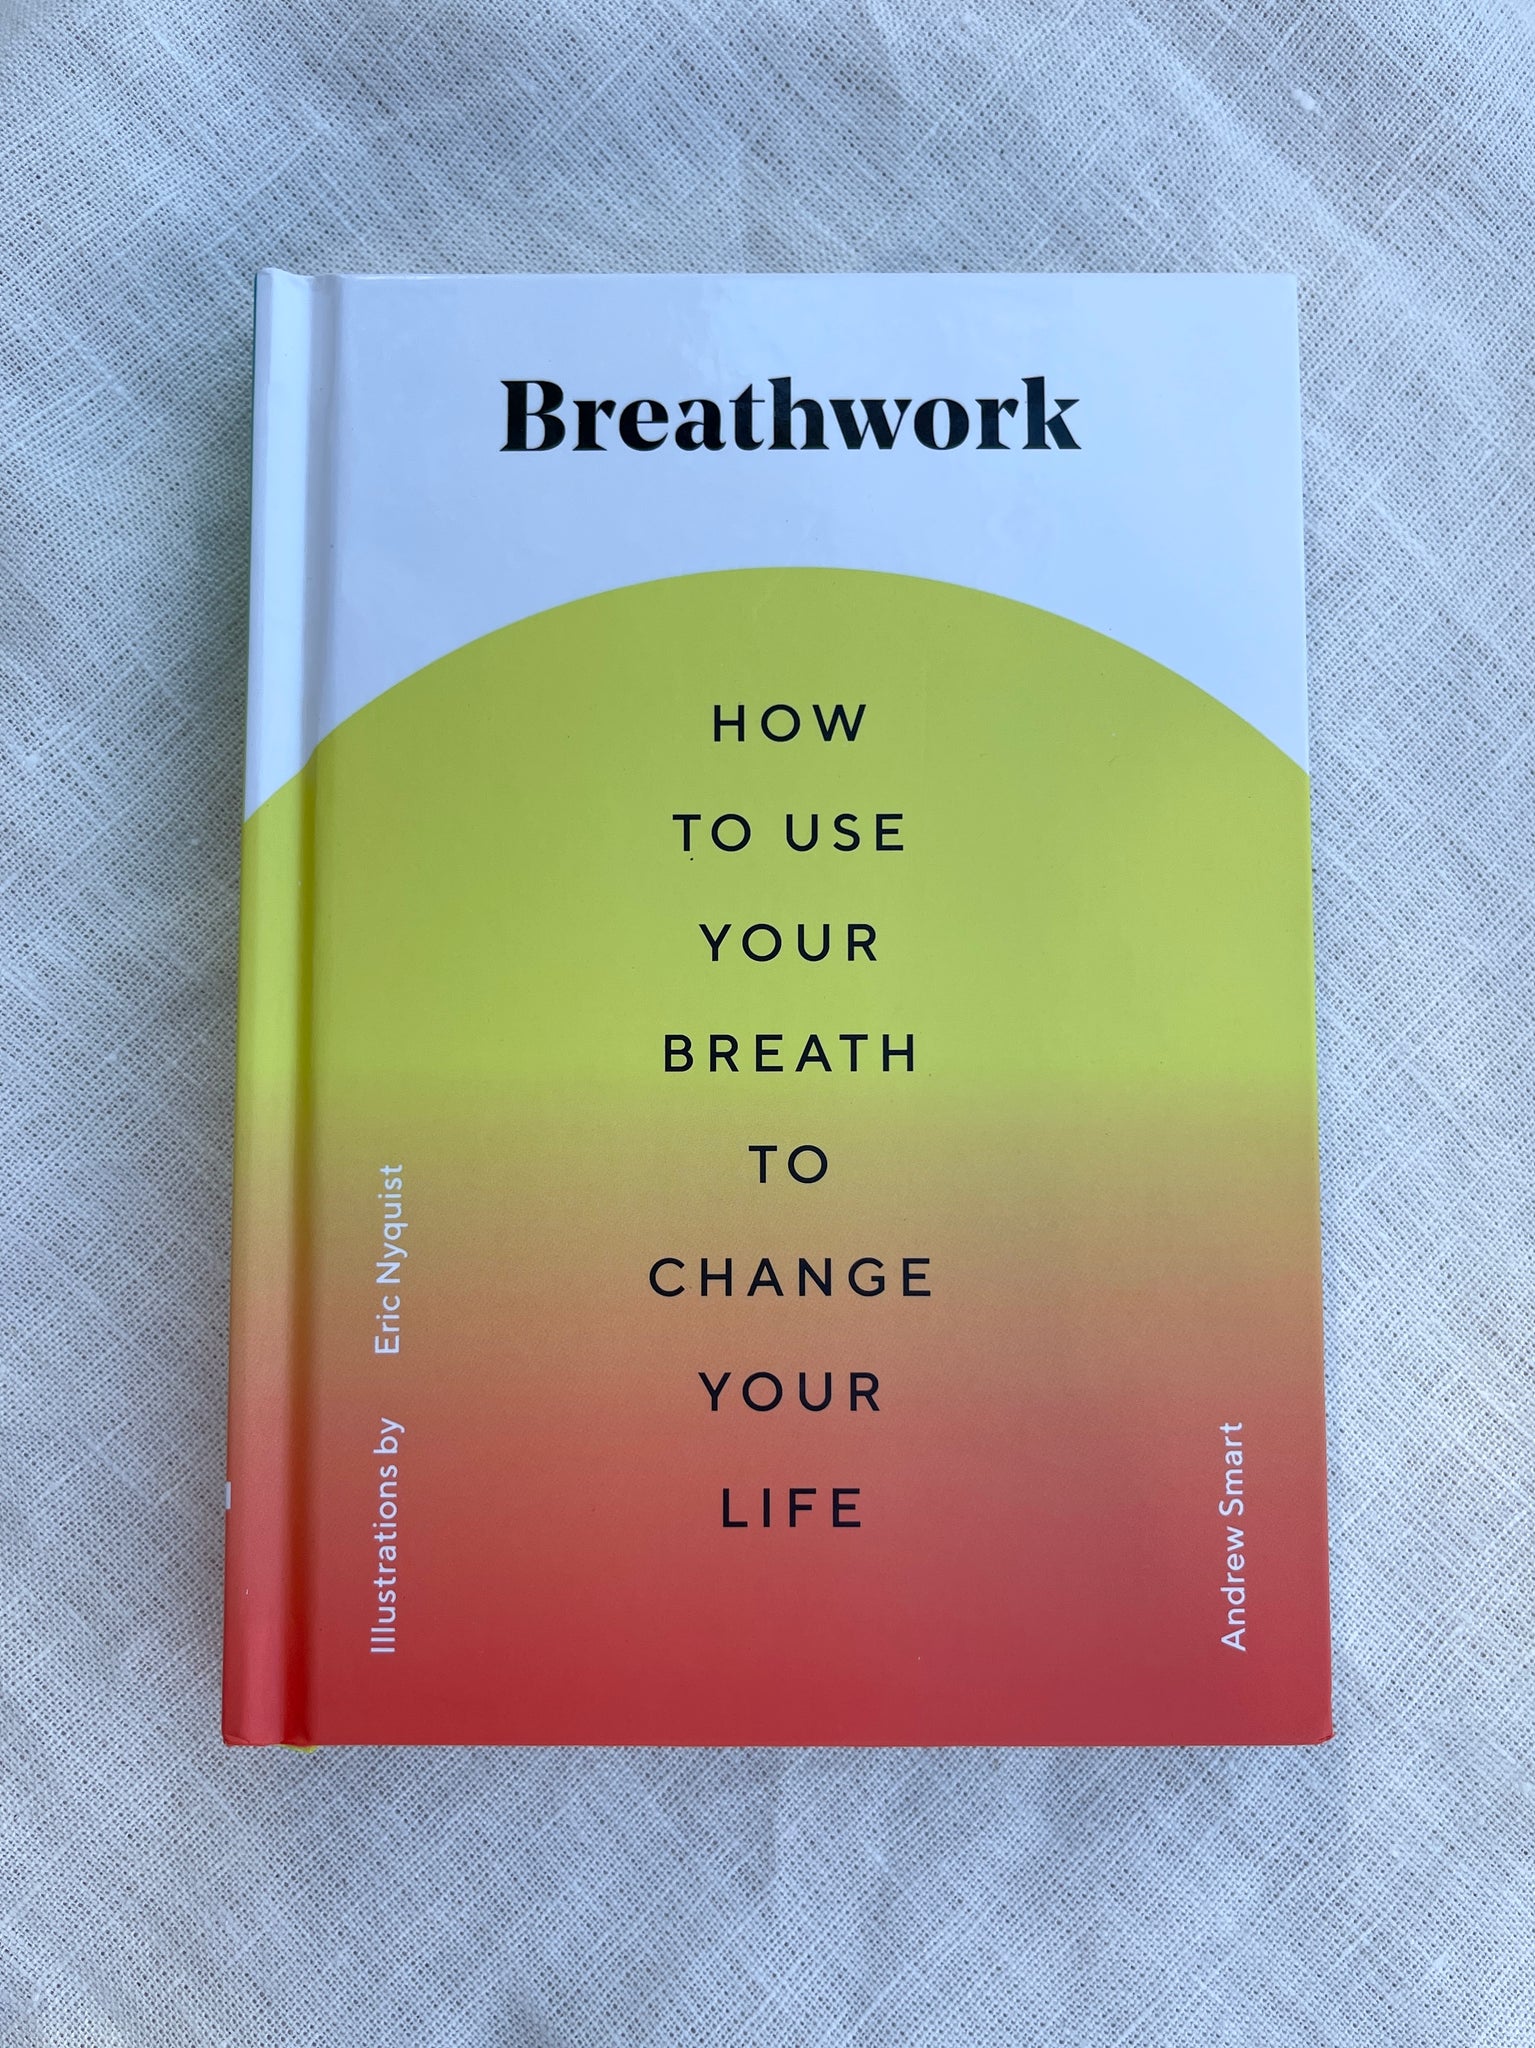 Breathwork book how to use your breath to change your life